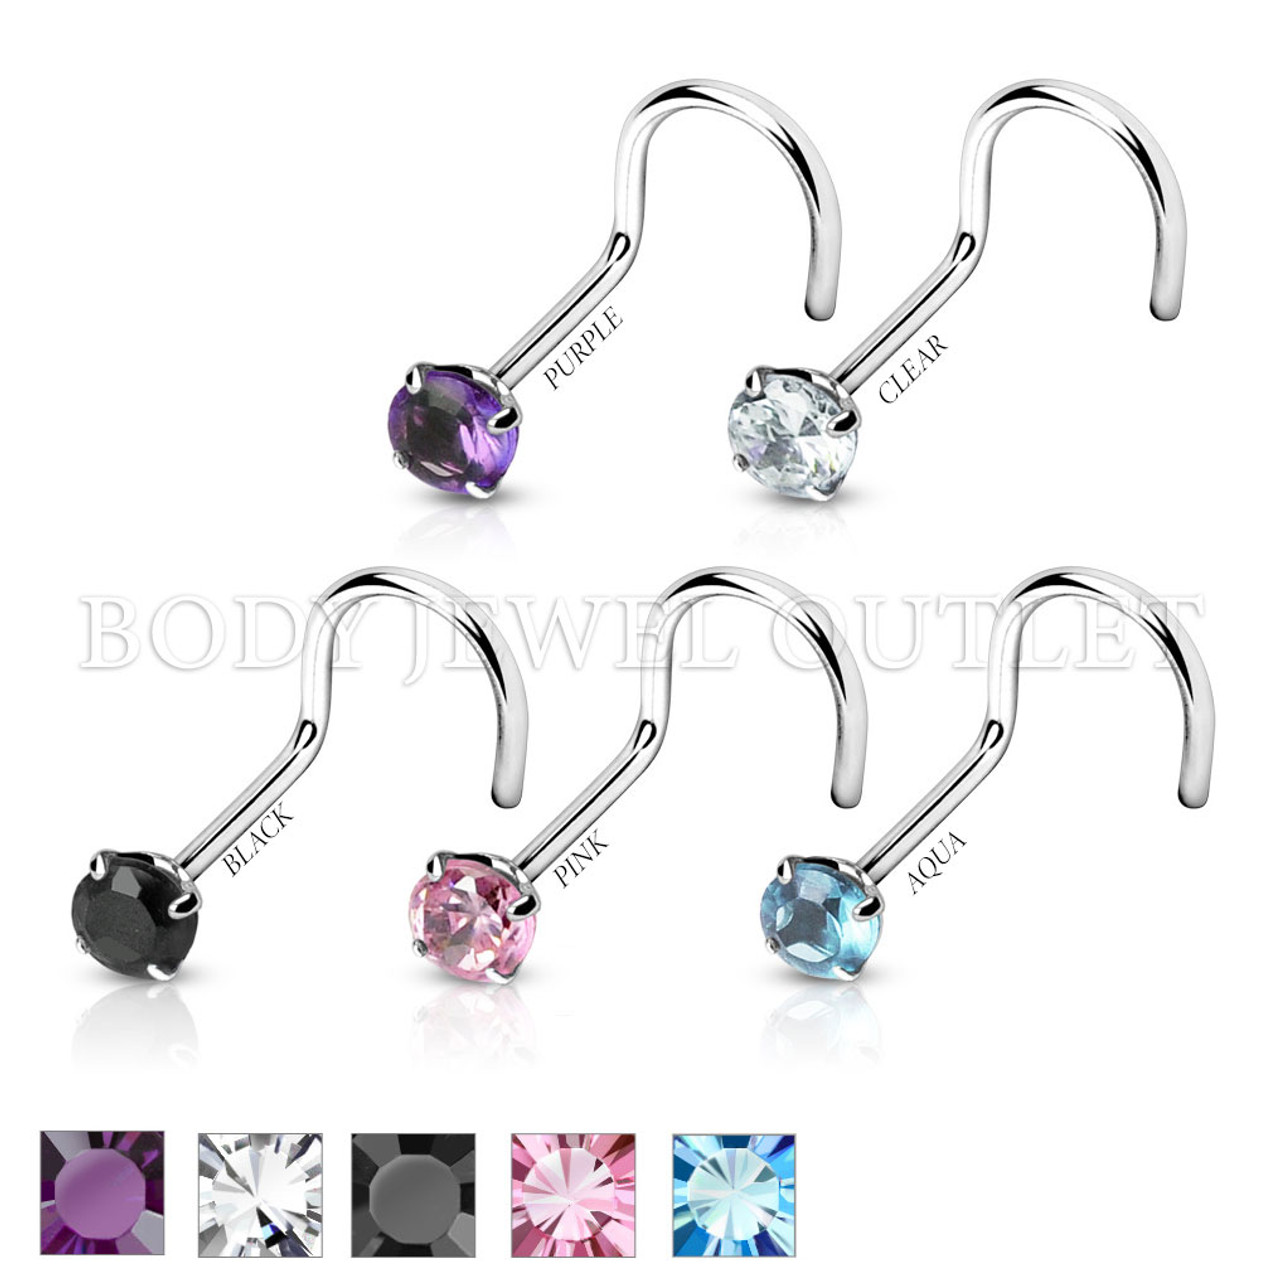 Nose Screw Ring w/Clear 3mm Round Pronged Gem 20 Gauge 1/4" Steel Body Jewelry 